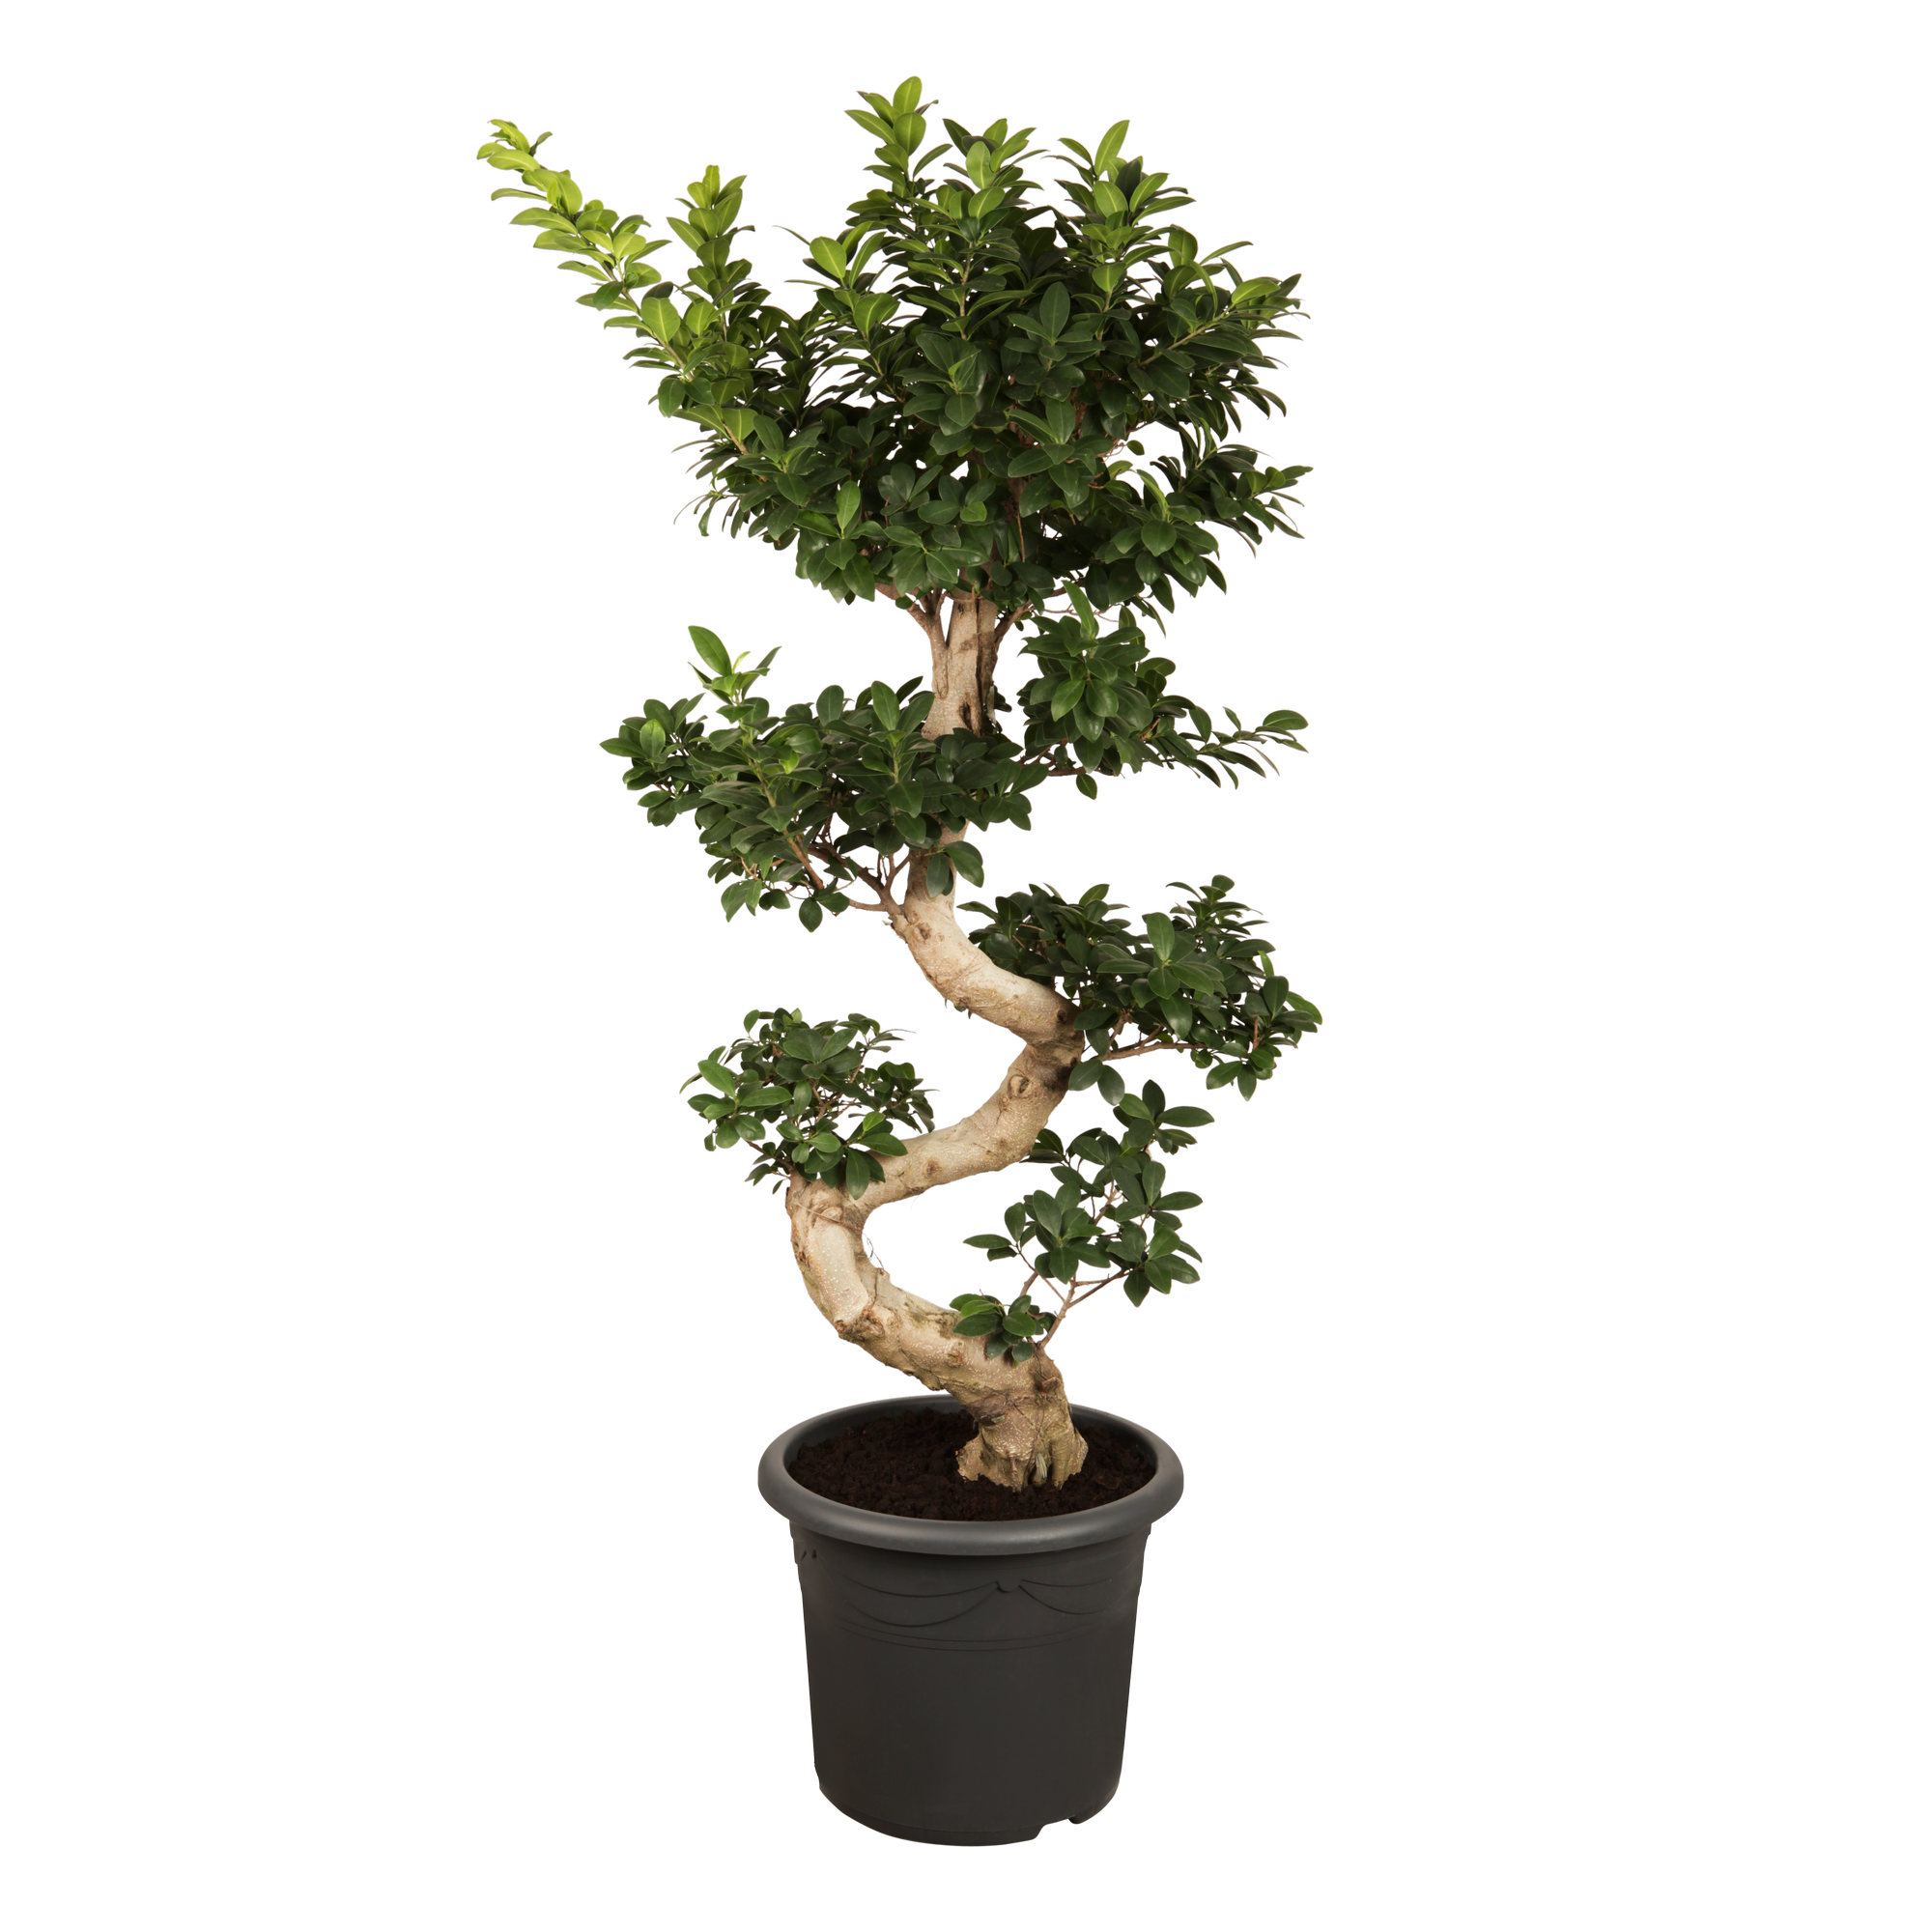 Zimmerbonsai Ficus 'Ginseng' S-Form 25 cm Topf + product video